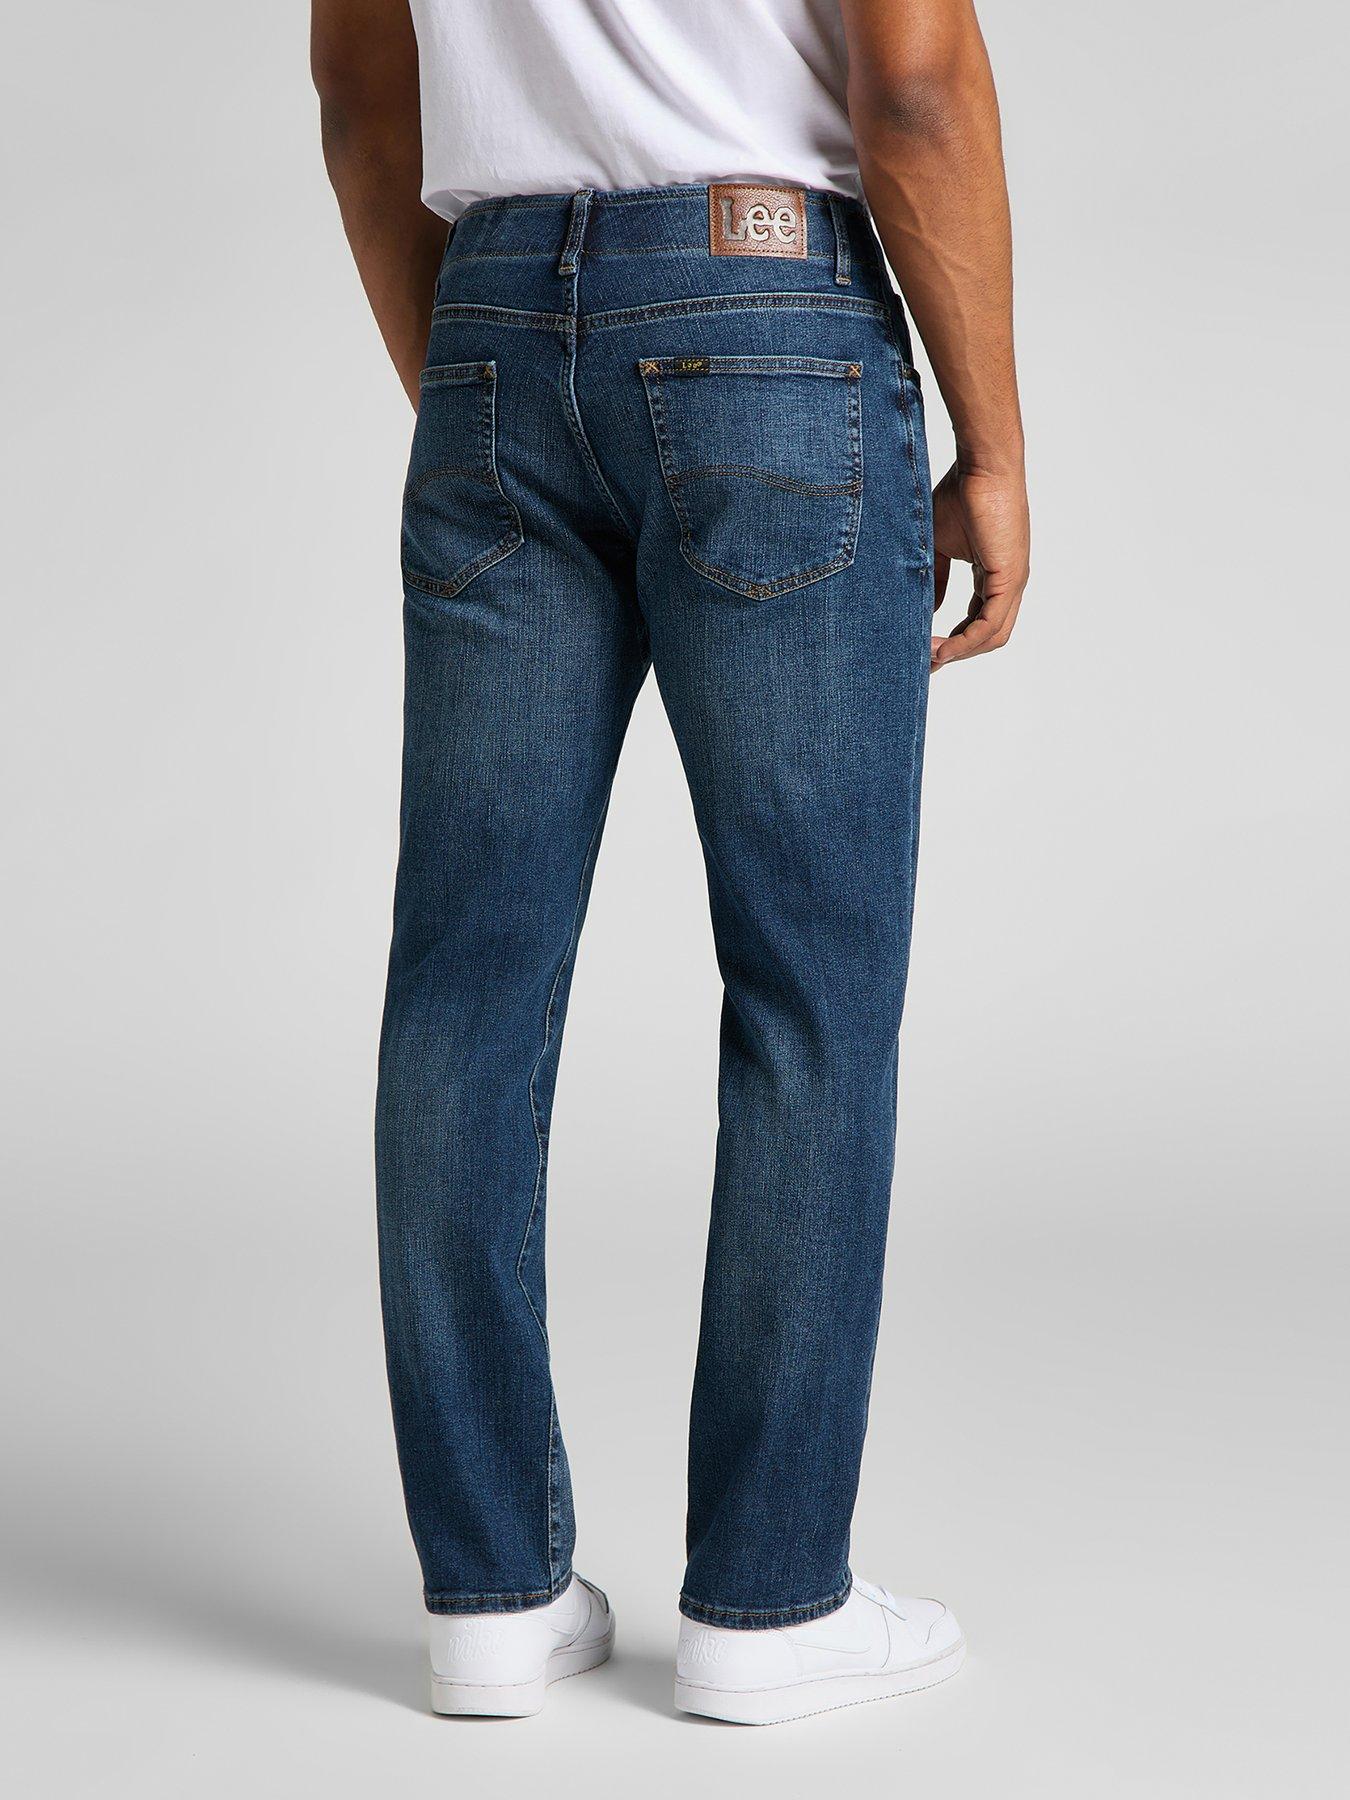 Lee Lee Maddox Extreme Motion Straight Fit Jeans - Blue